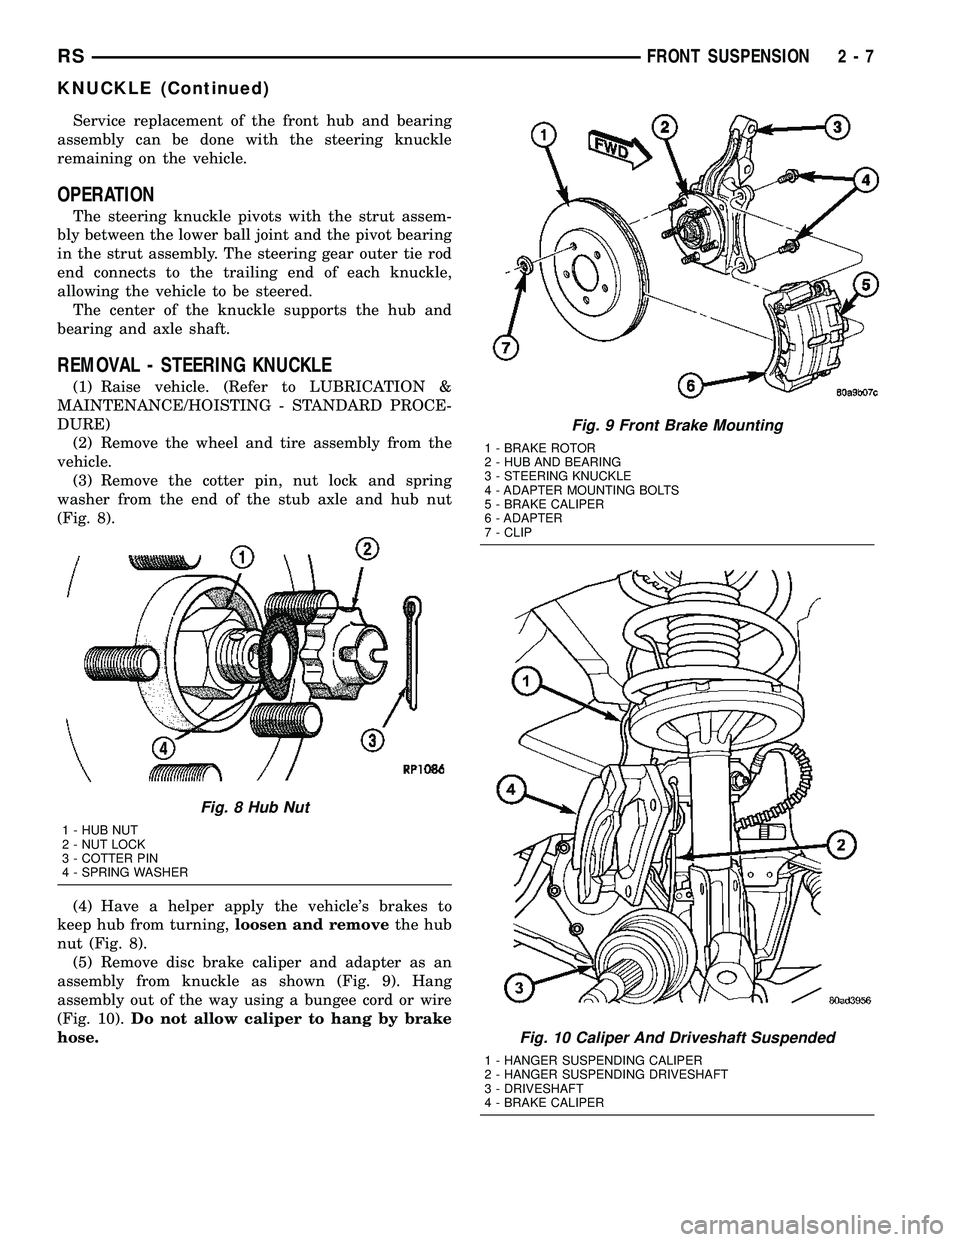 CHRYSLER VOYAGER 2004  Service Manual Service replacement of the front hub and bearing
assembly can be done with the steering knuckle
remaining on the vehicle.
OPERATION
The steering knuckle pivots with the strut assem-
bly between the lo